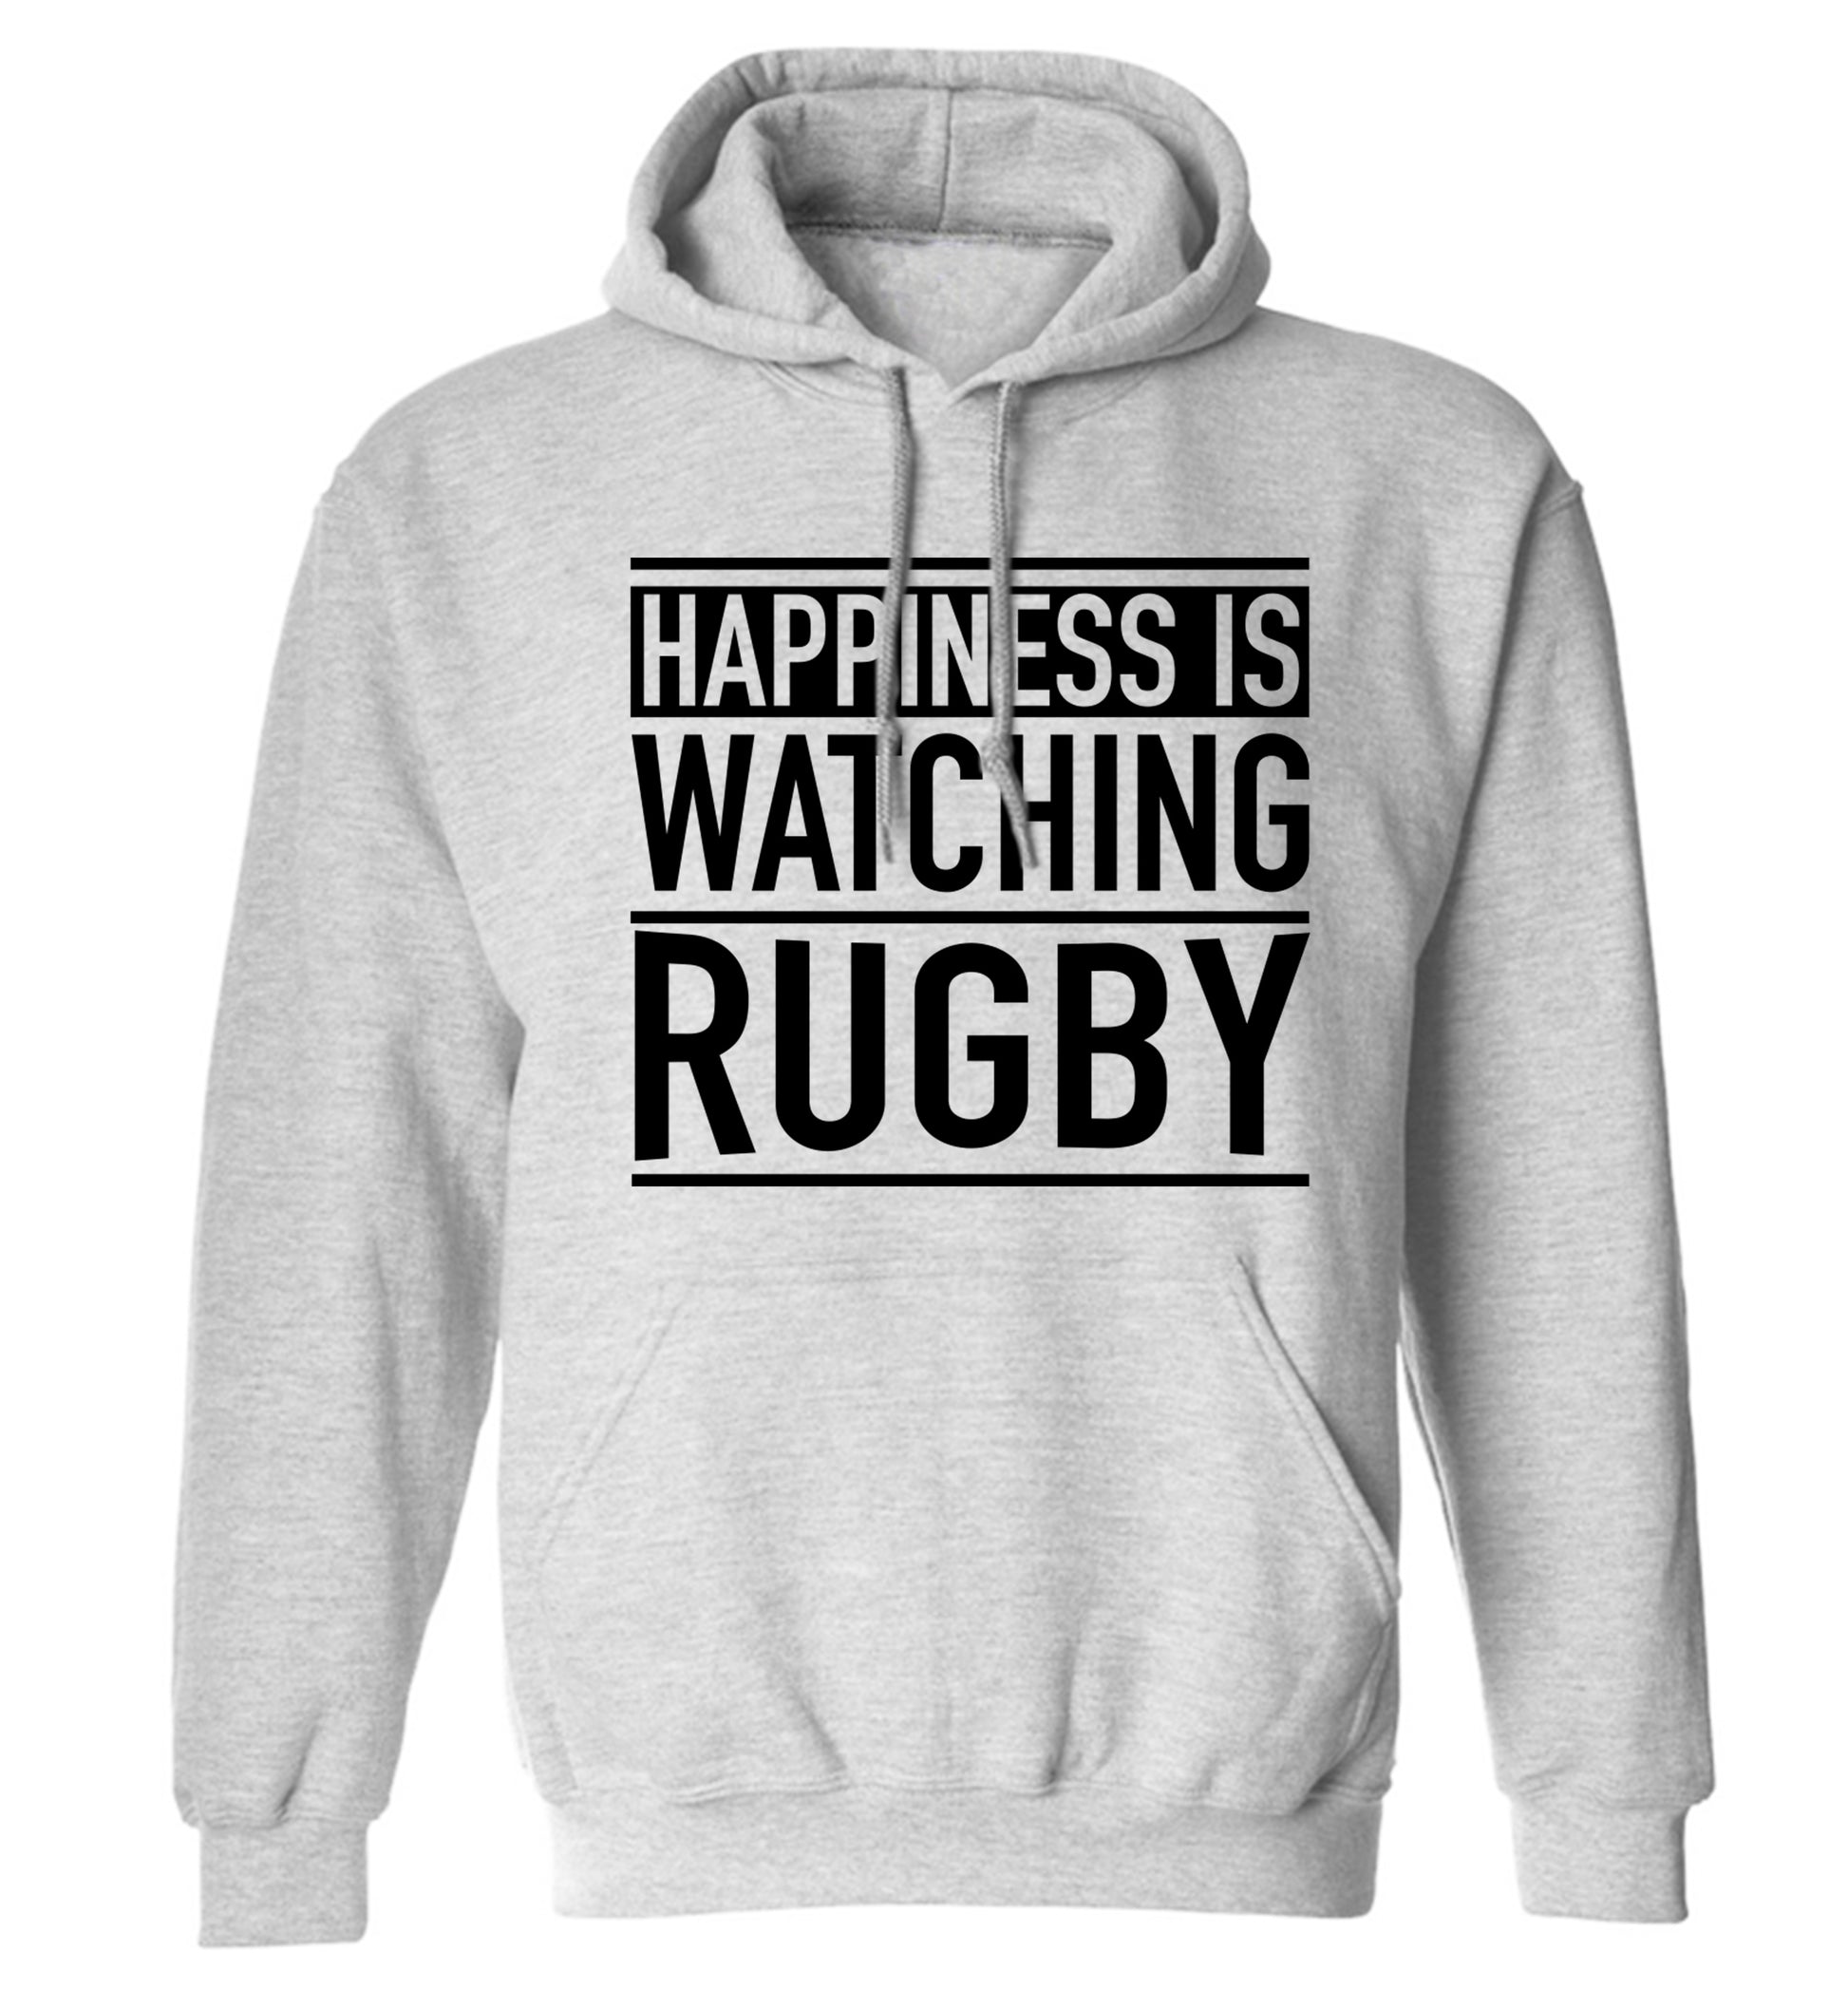 Happiness is watching rugby adults unisex grey hoodie 2XL